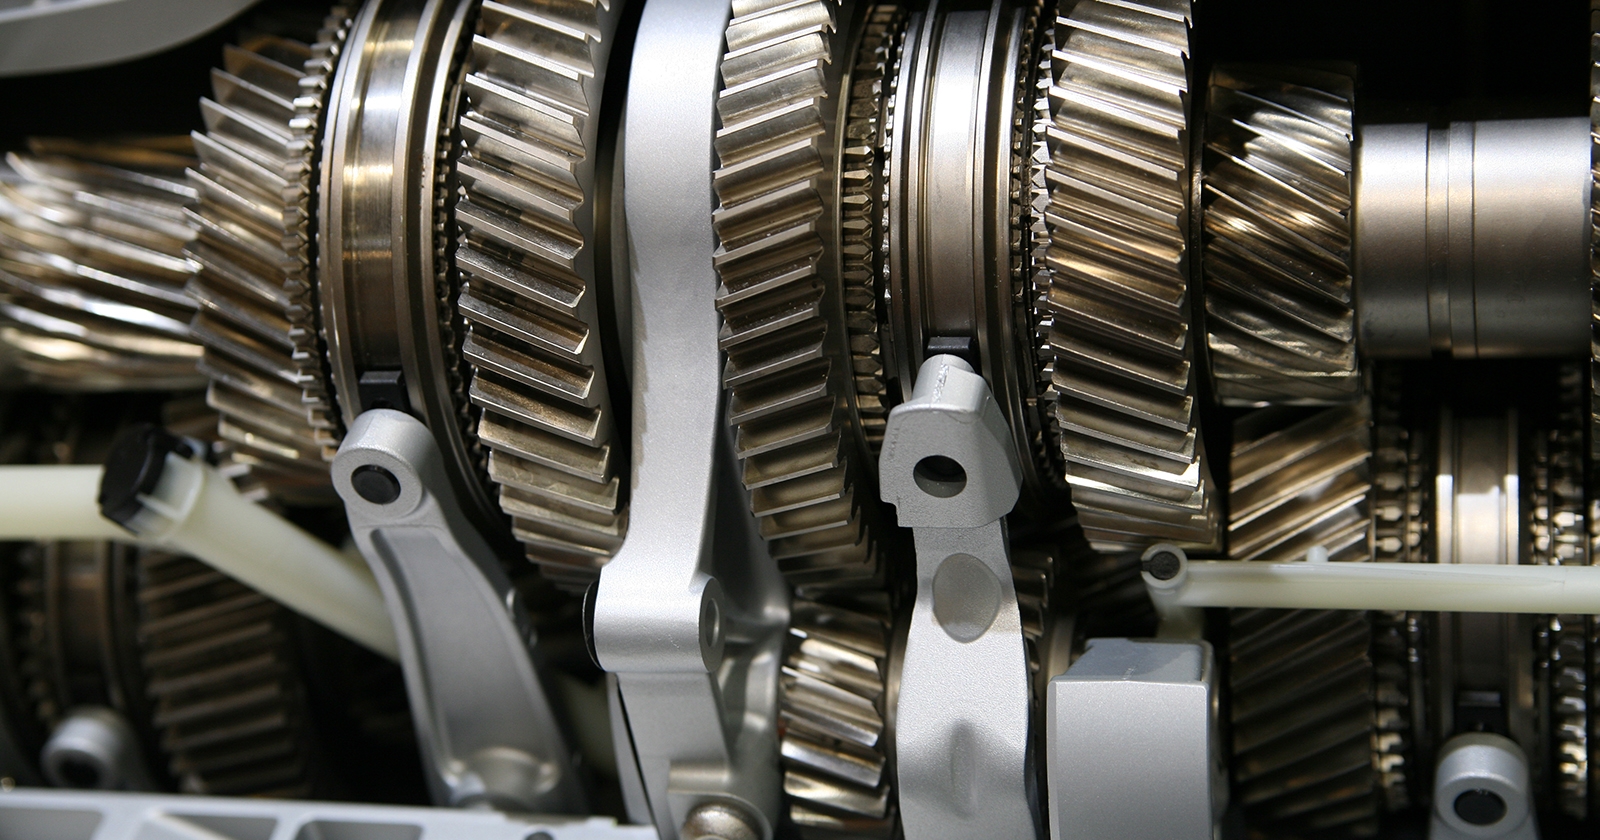 Artistic photo of mechanical gears. Exponent provides mechanical engineering support for disputes and claims.  